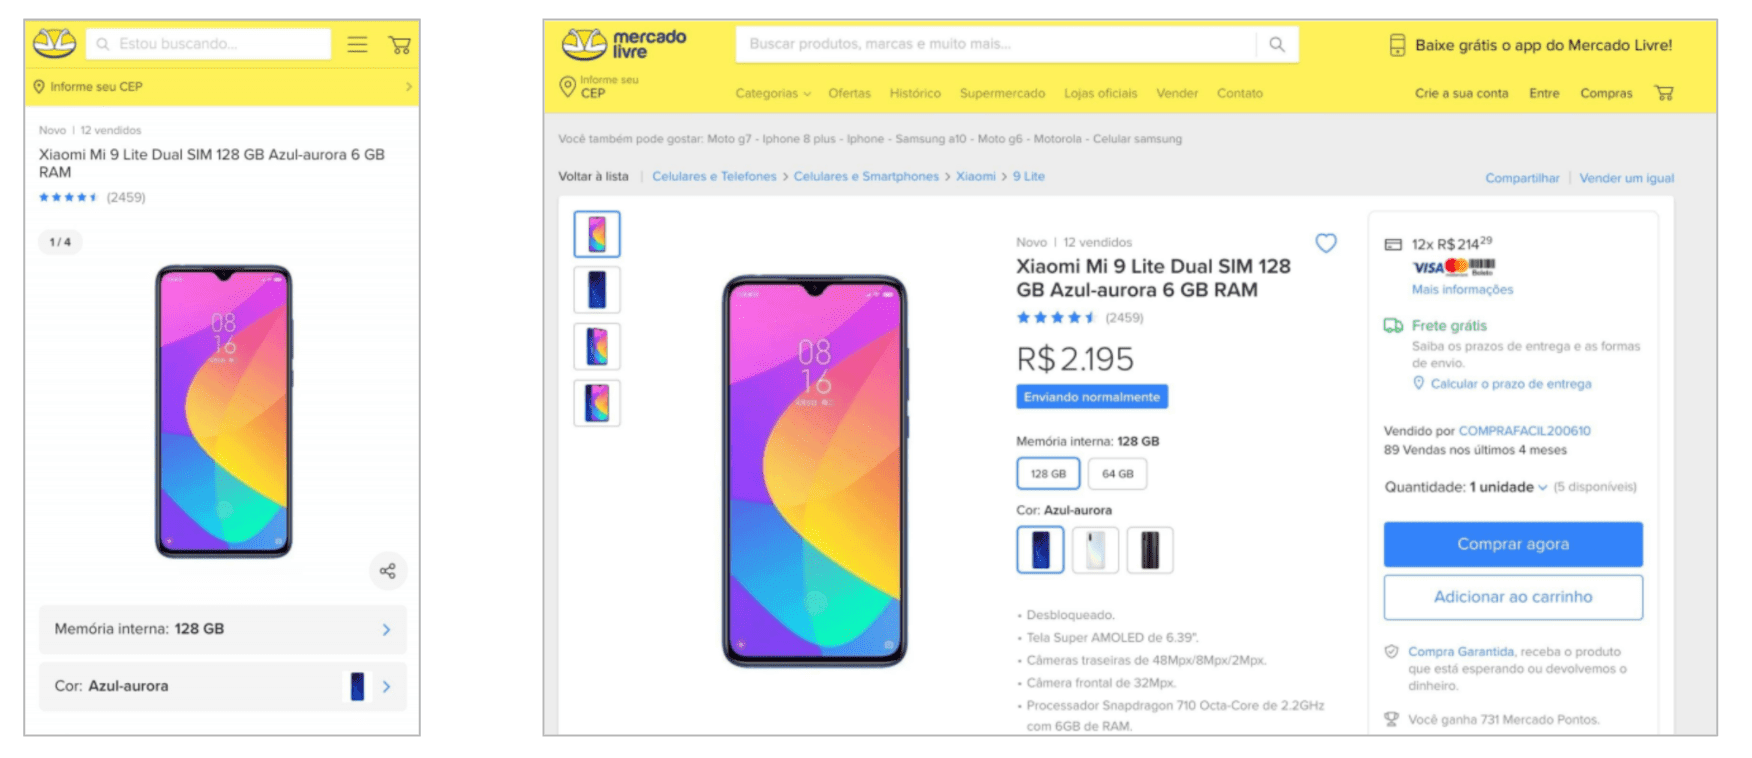 Mobile and Desktop versions of a Mercado Libre product detail page.